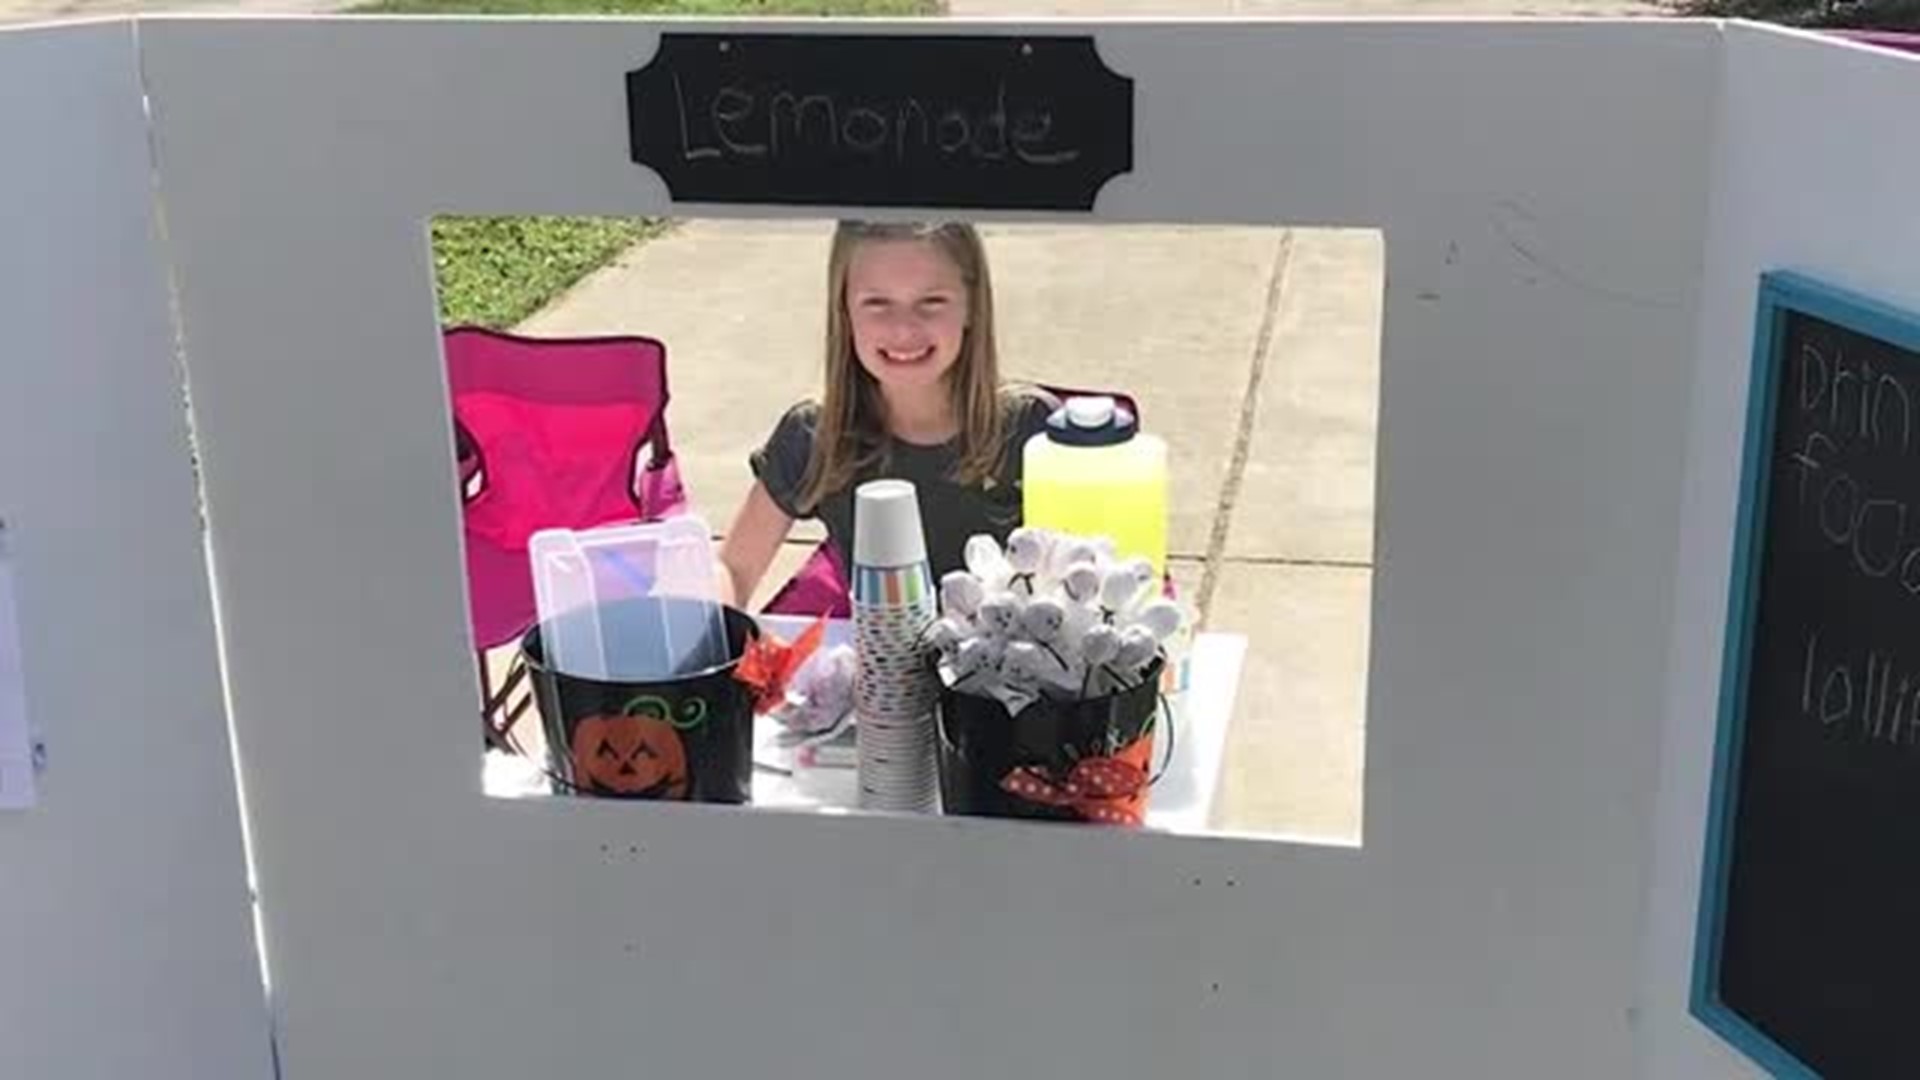 Nine Year Old Raises Enough Money to Buy 108 Thanksgiving Meals and Turkeys for Families in Need